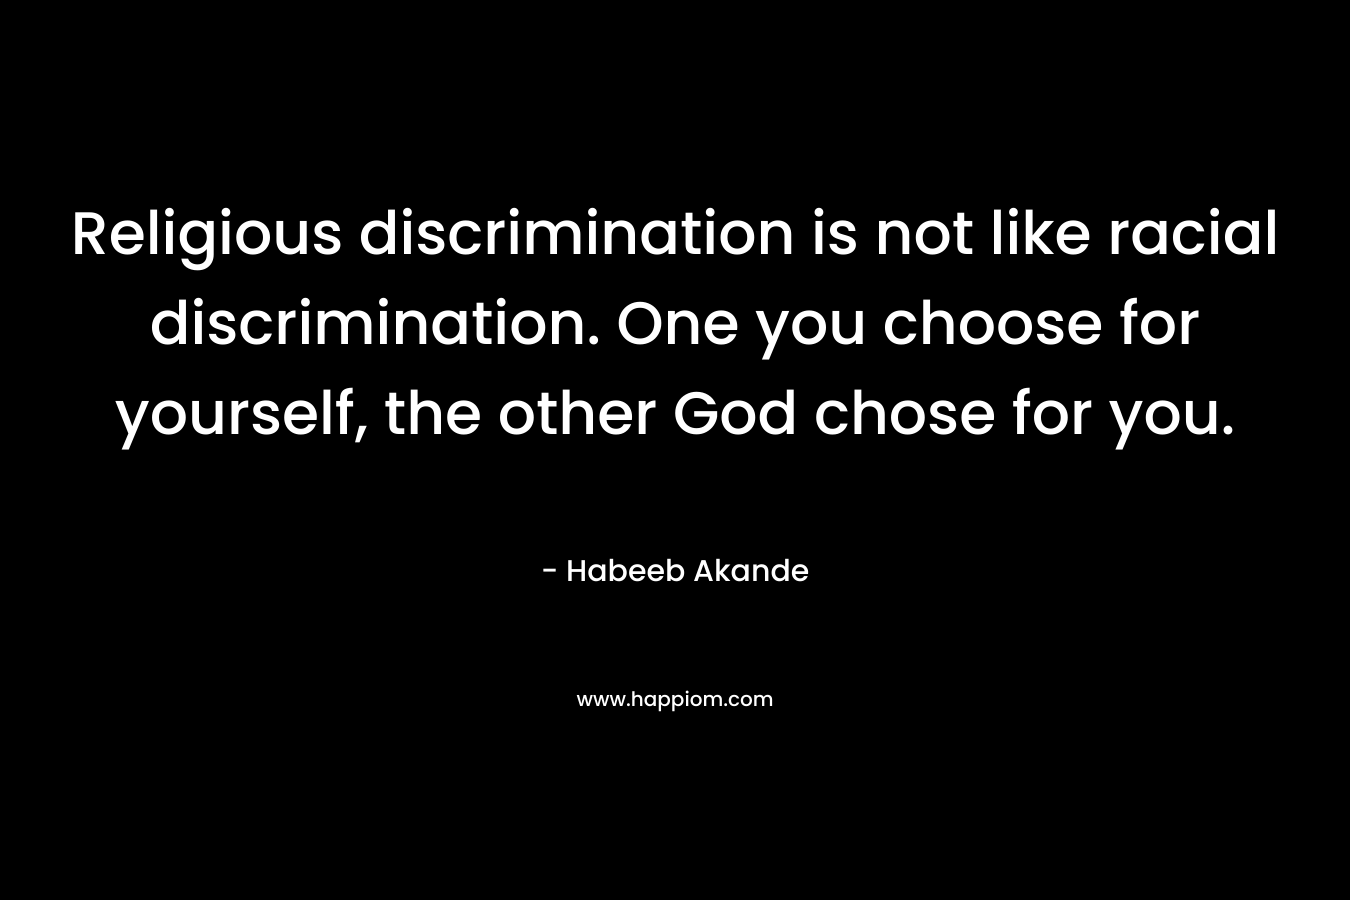 Religious discrimination is not like racial discrimination. One you choose for yourself, the other God chose for you.